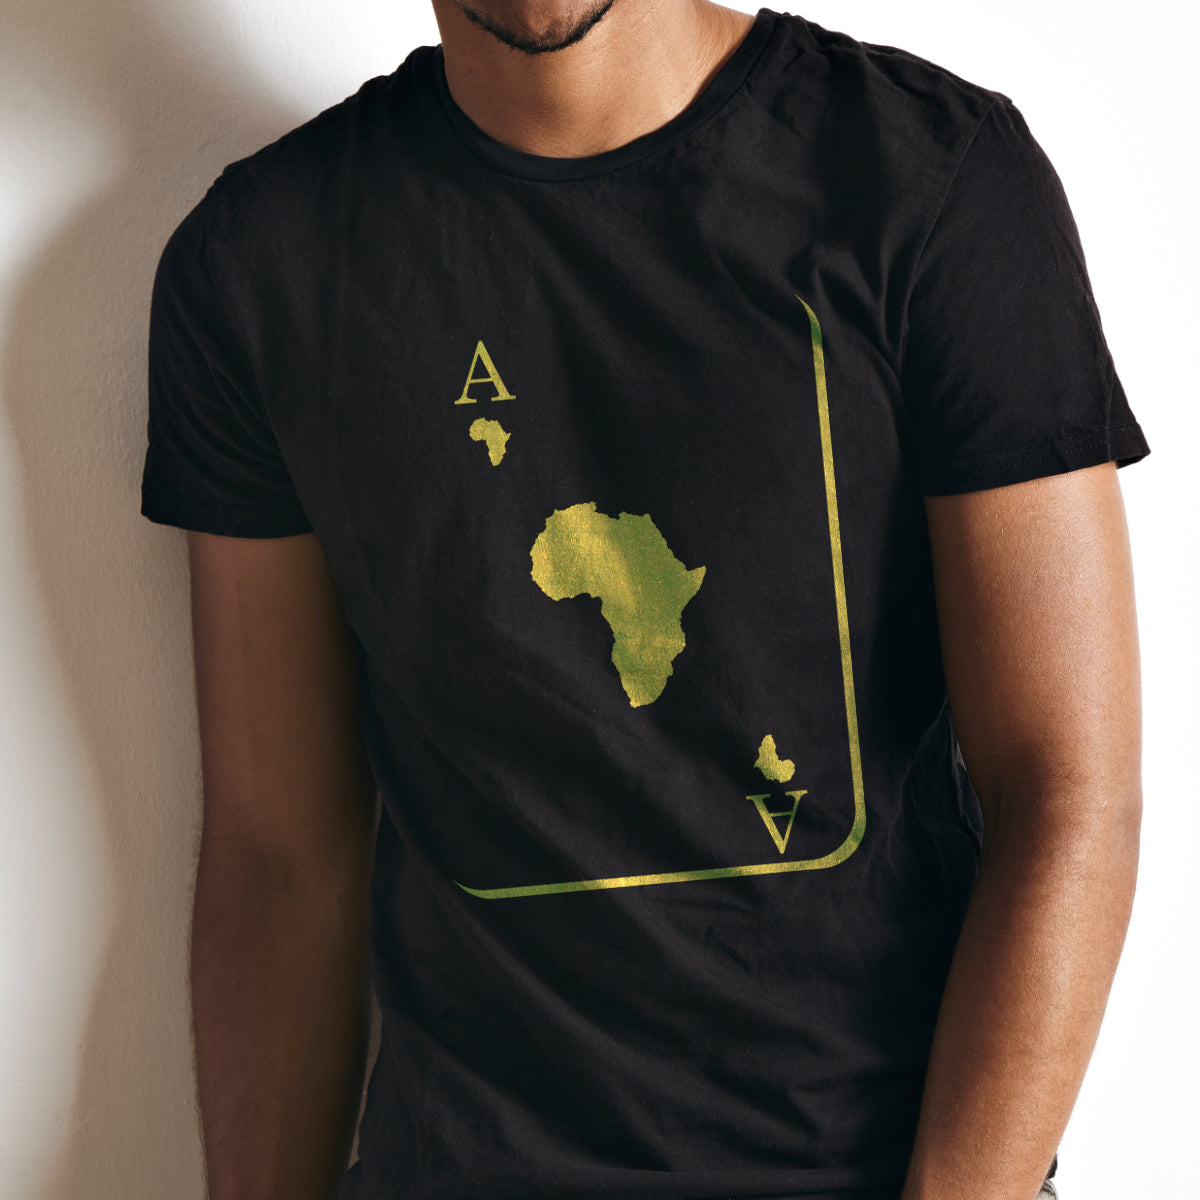 The Ace Alpha, Black and Old Gold Tee